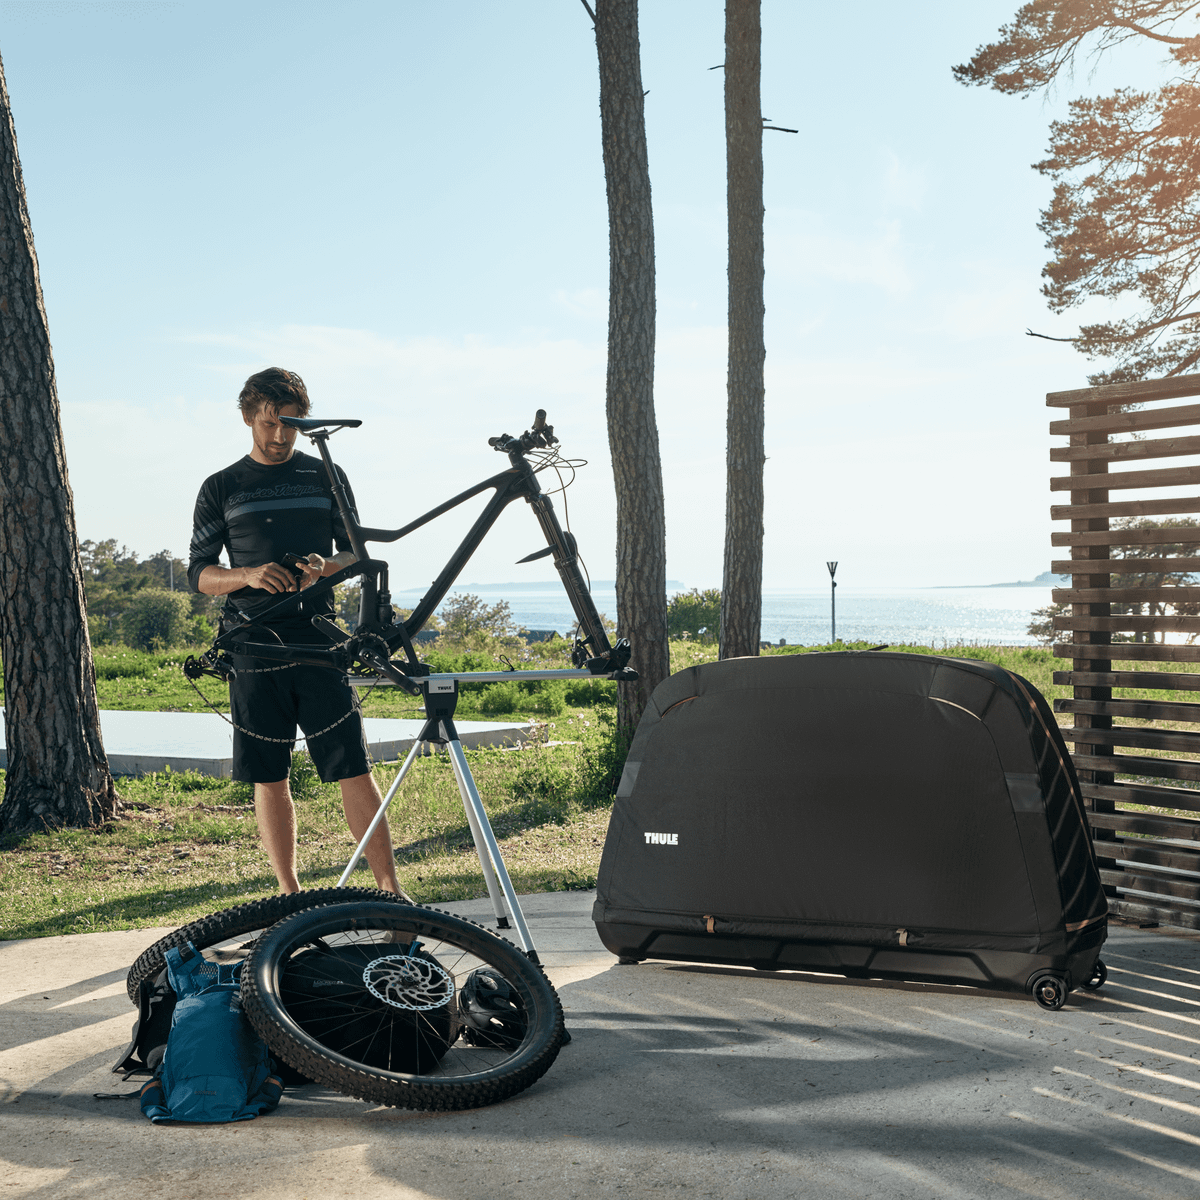 On a sunny outdoor area a man fixes his bike on a stand next to a Thule Roundtrip MTB bike travel case.